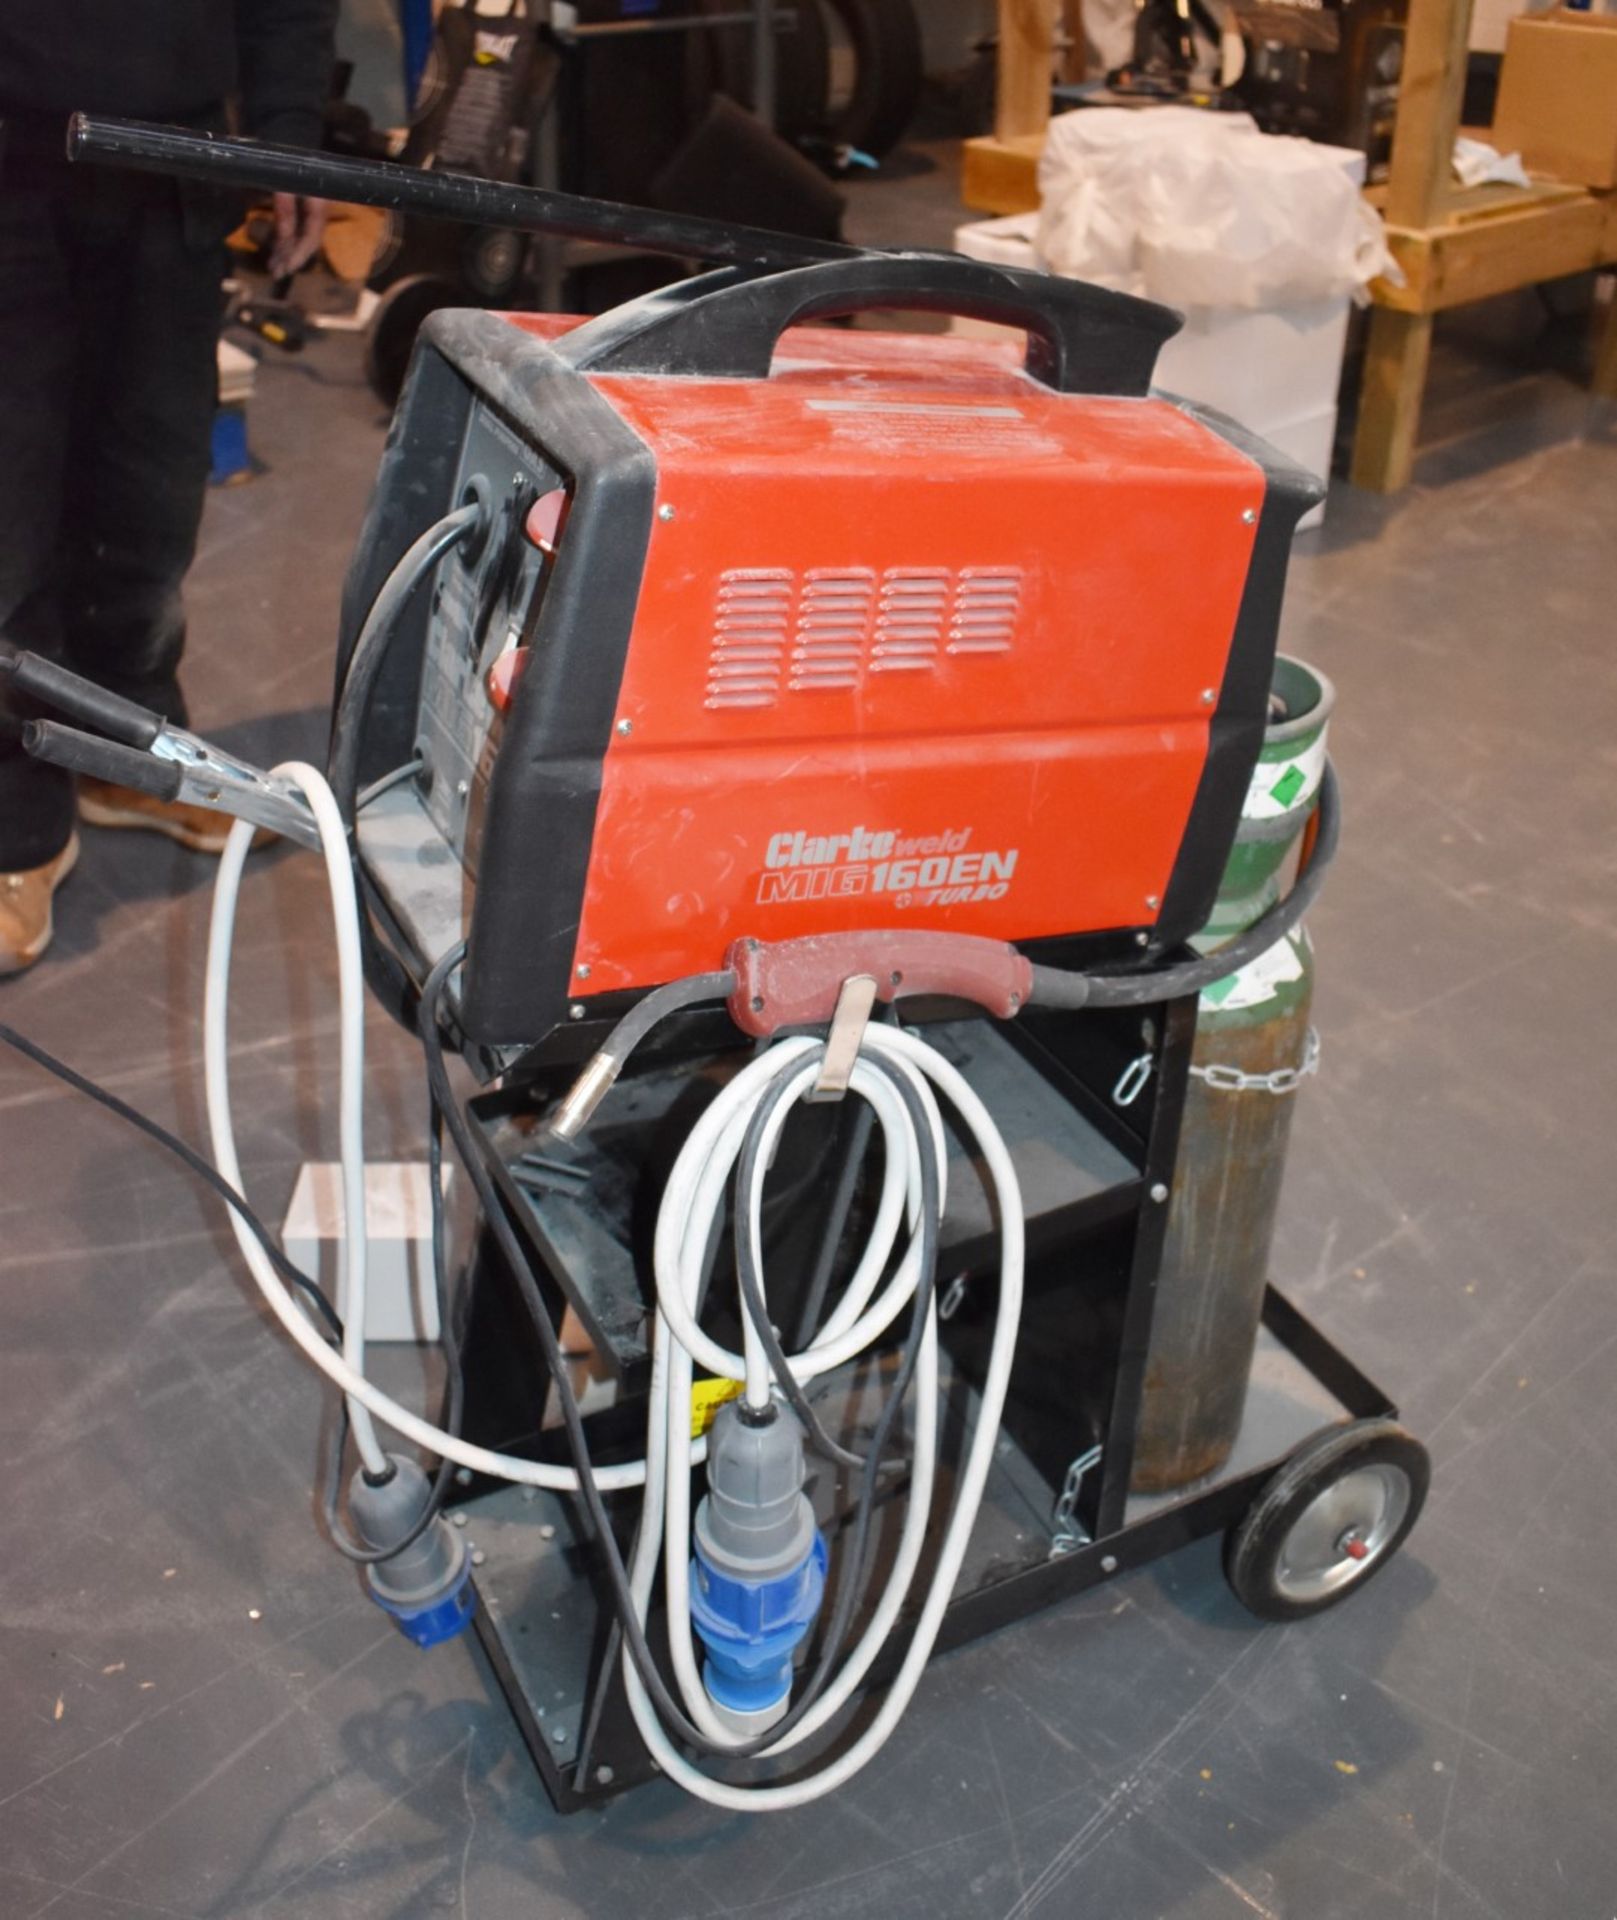 1 x Clarke MIG160EN Turbo No-Gas/Gas MIG Welder With Stand and Accessories - Ref 449 - CL501 -